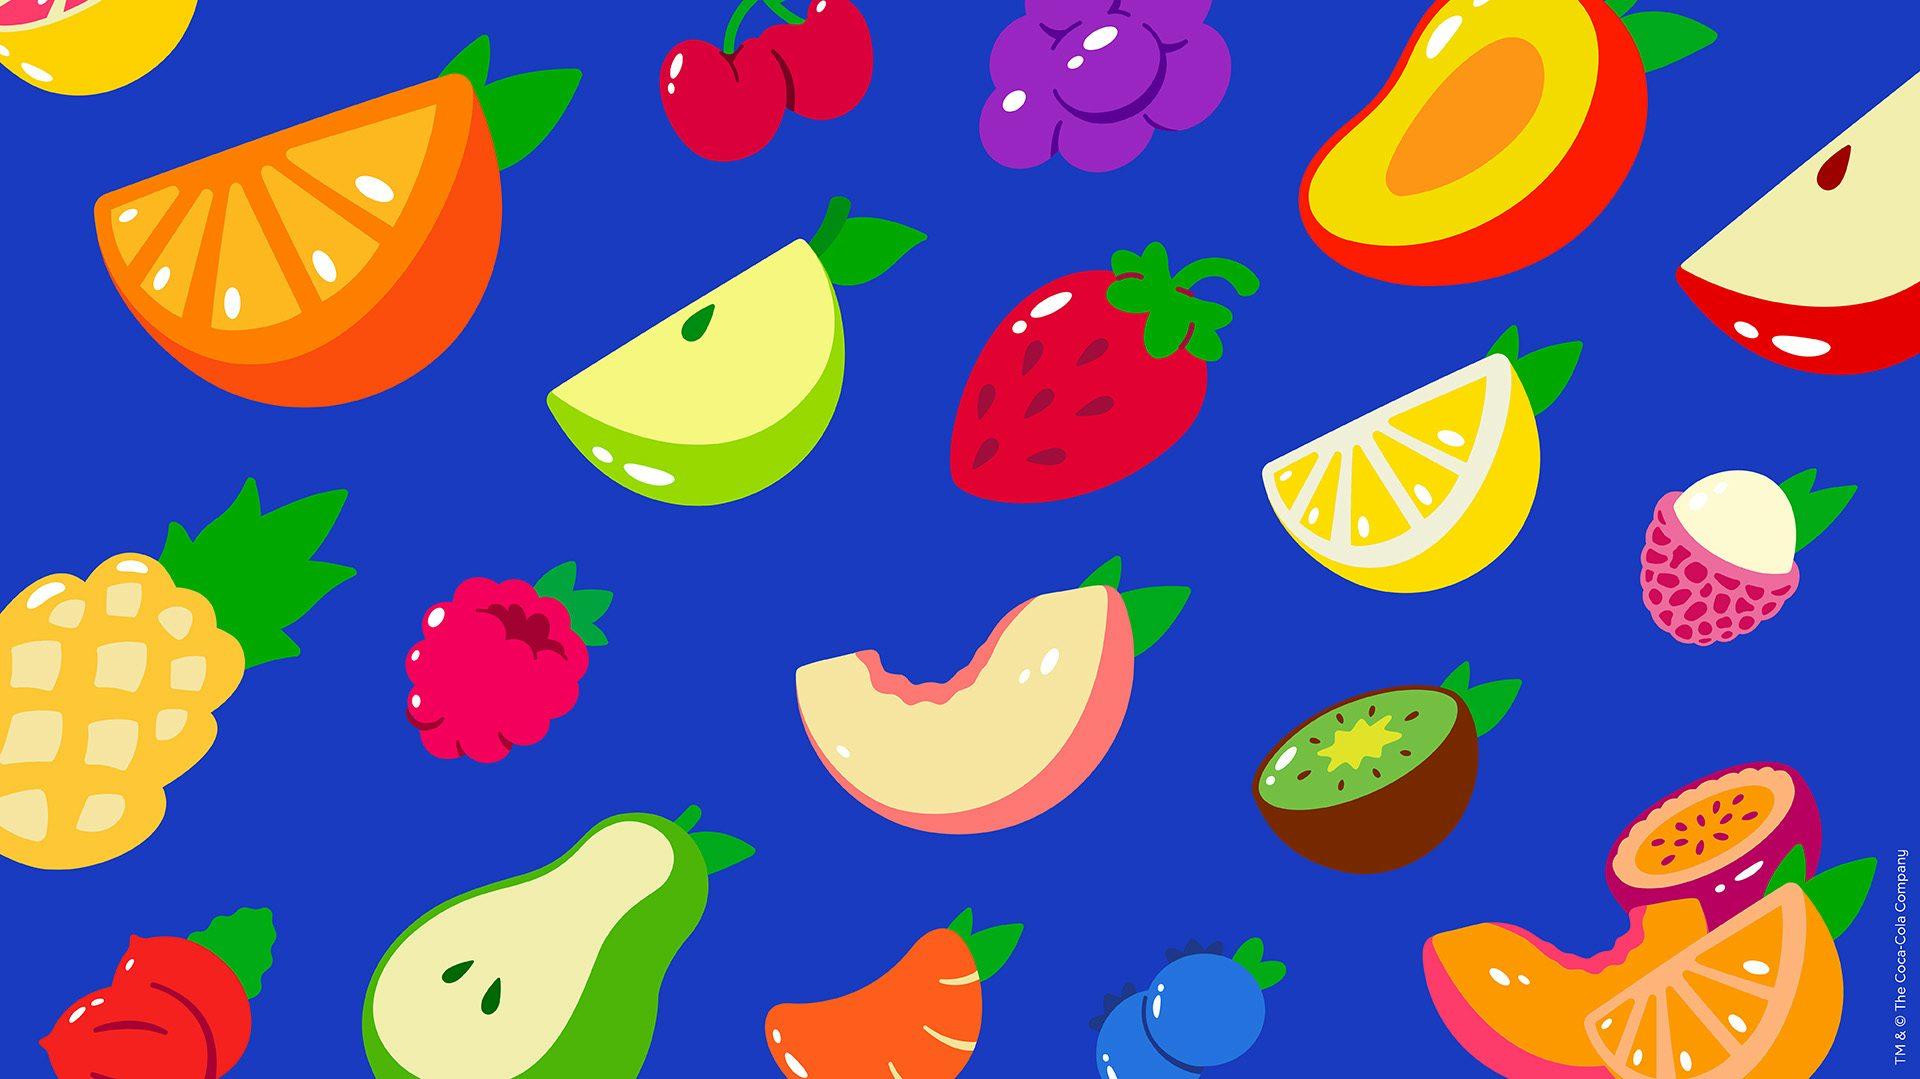 Graphic showing illustrations of fruit on a bright blue background